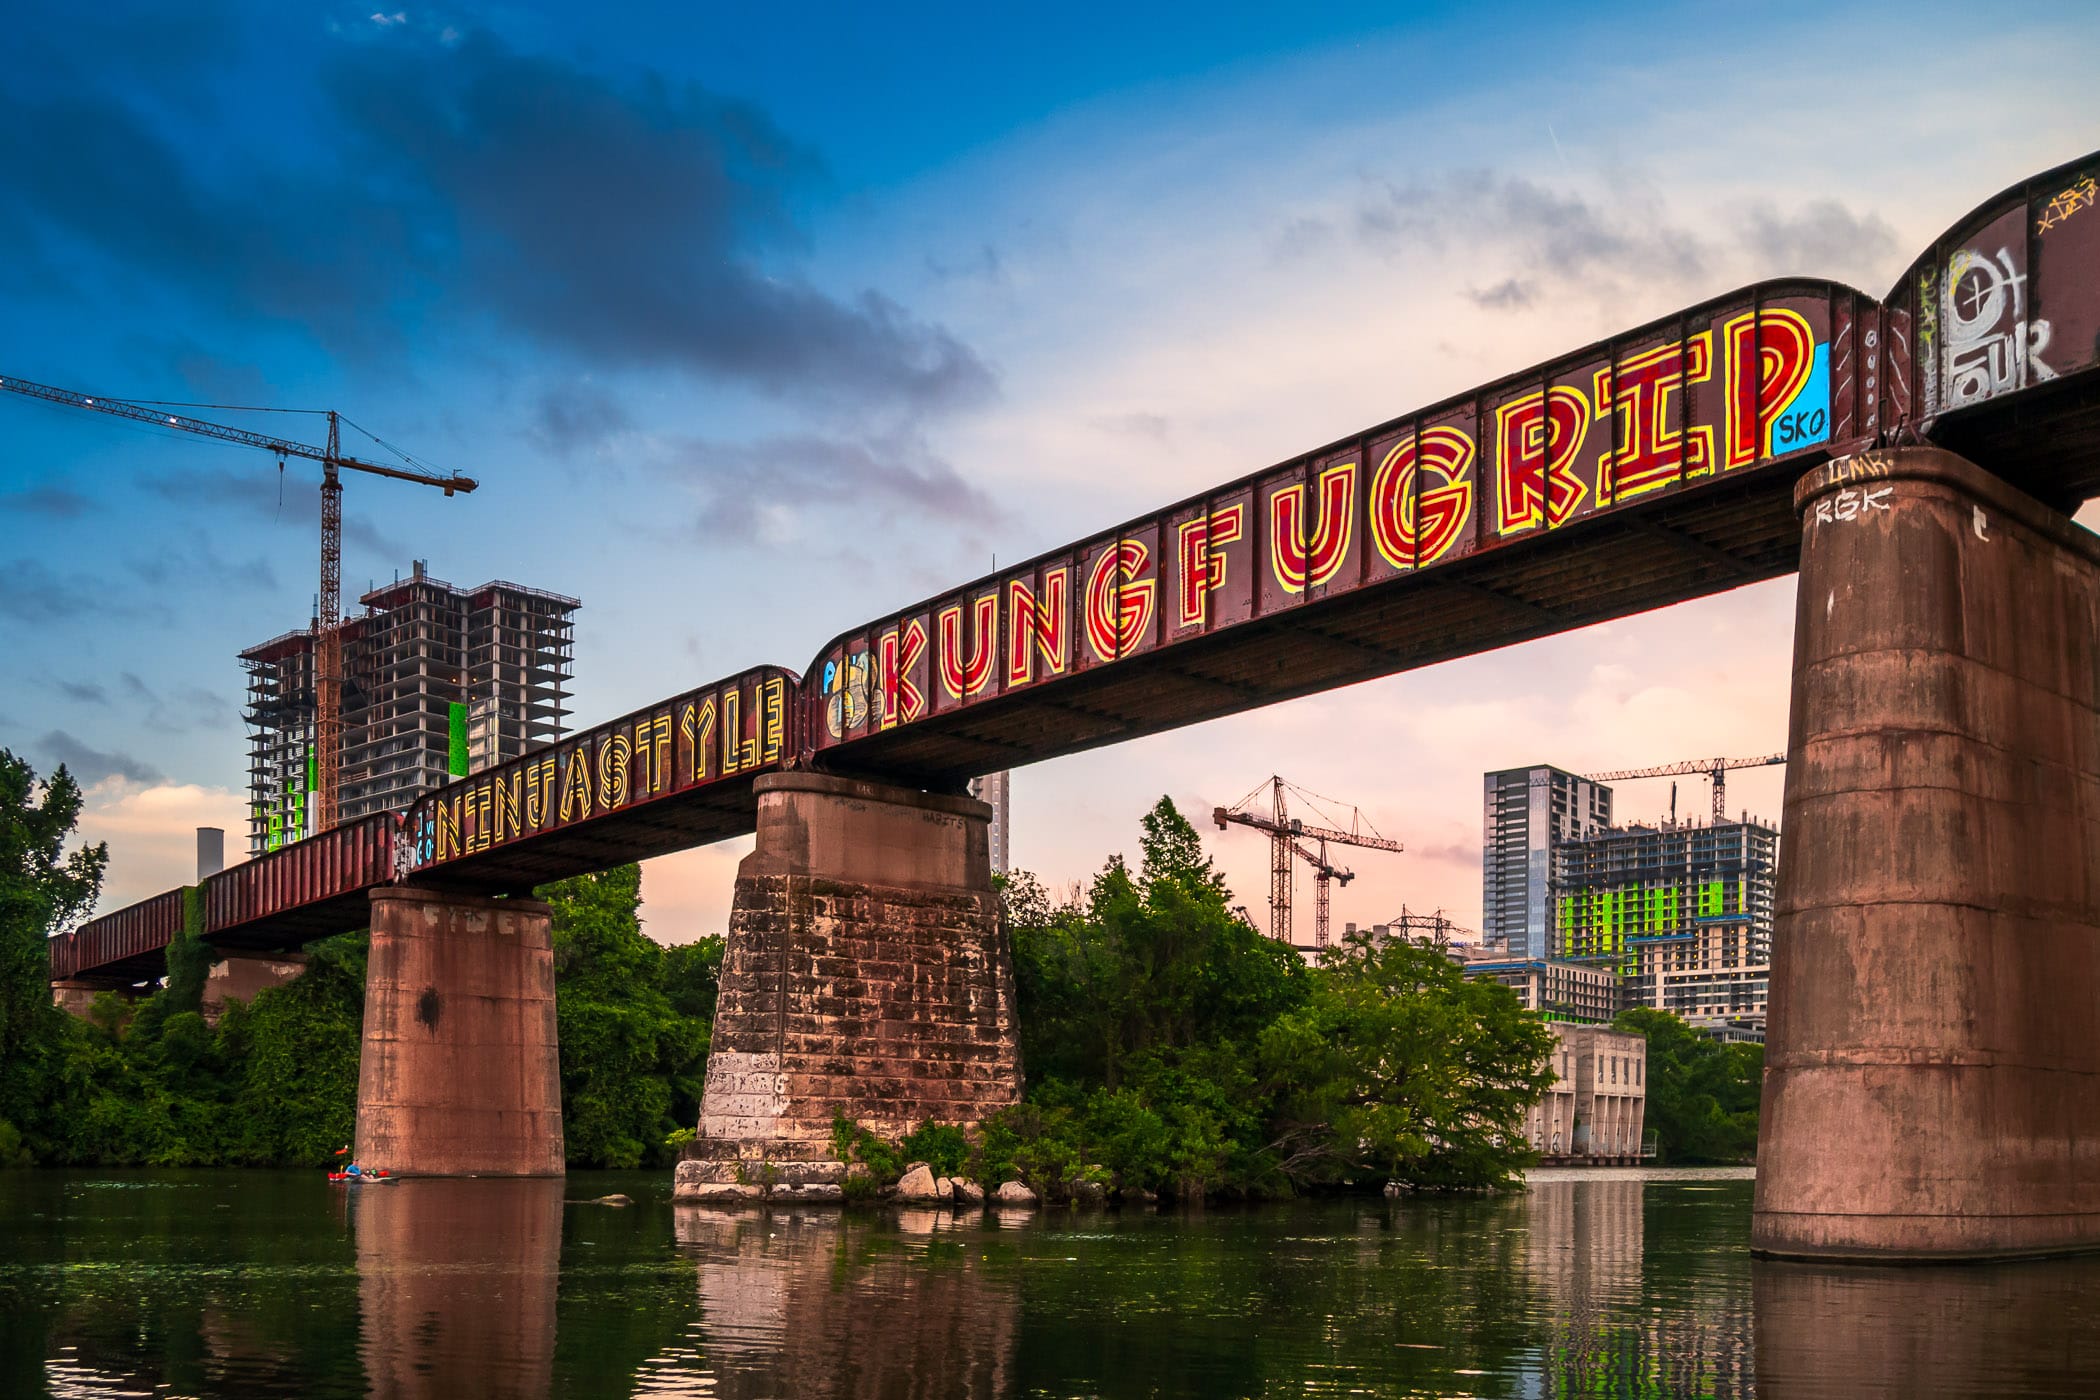 The Missouri-Pacific/Union Pacific Railroad Bridge—built in 1902—spans Lady Bird Lake on the south side of Downtown Austin, Texas.